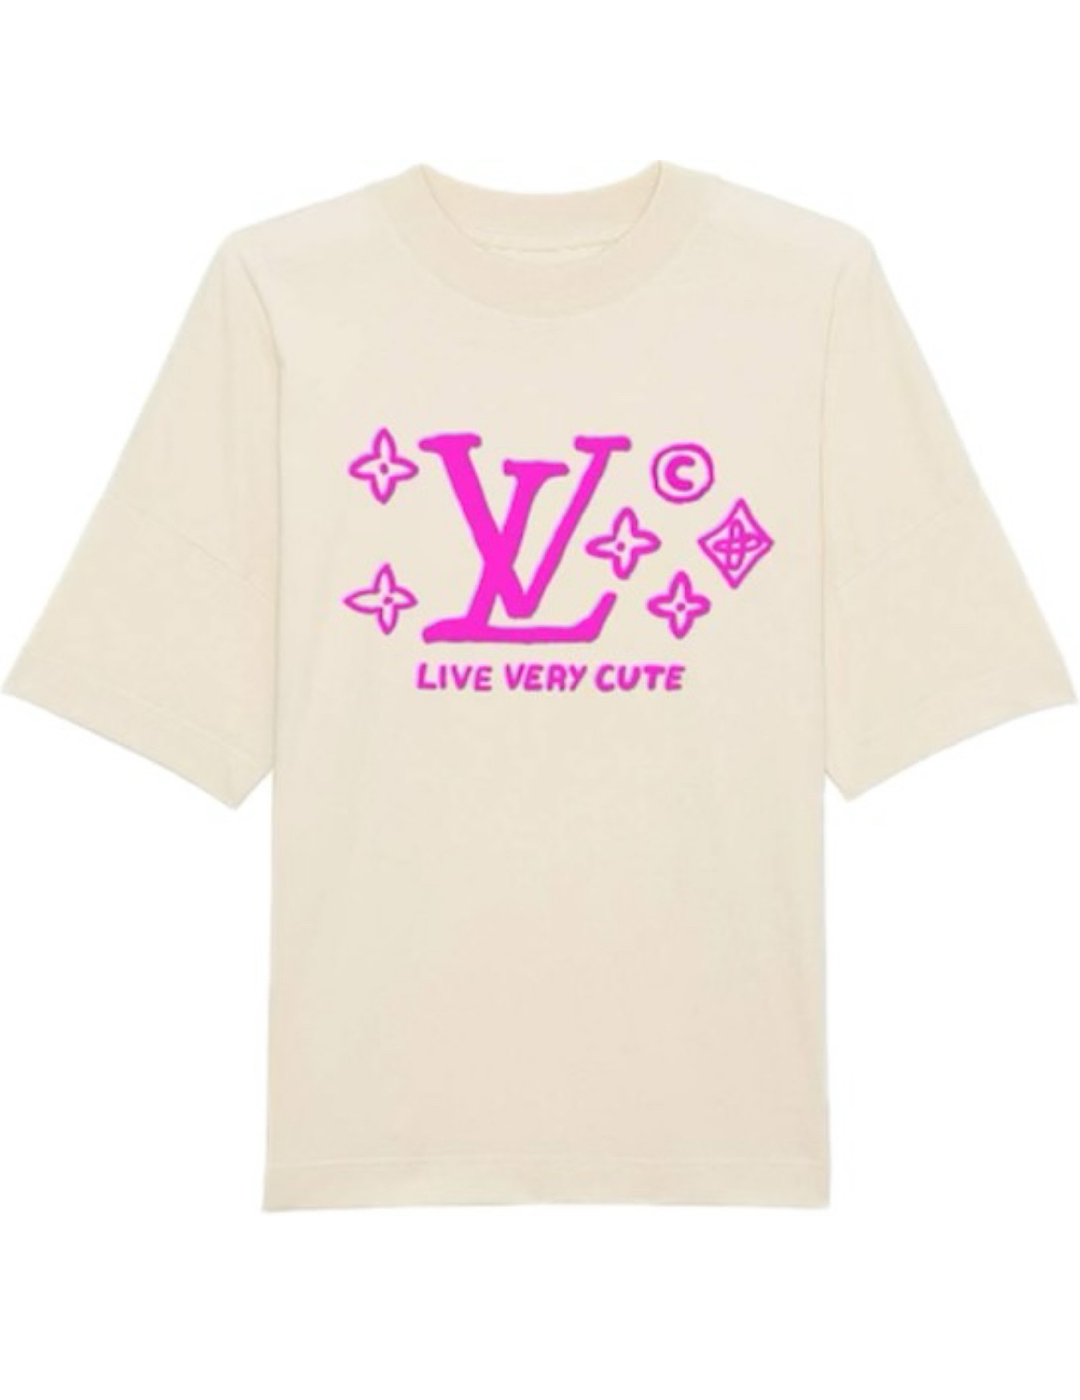 <img class='new_mark_img1' src='https://img.shop-pro.jp/img/new/icons47.gif' style='border:none;display:inline;margin:0px;padding:0px;width:auto;' />EGYBOY / T-SHIRT